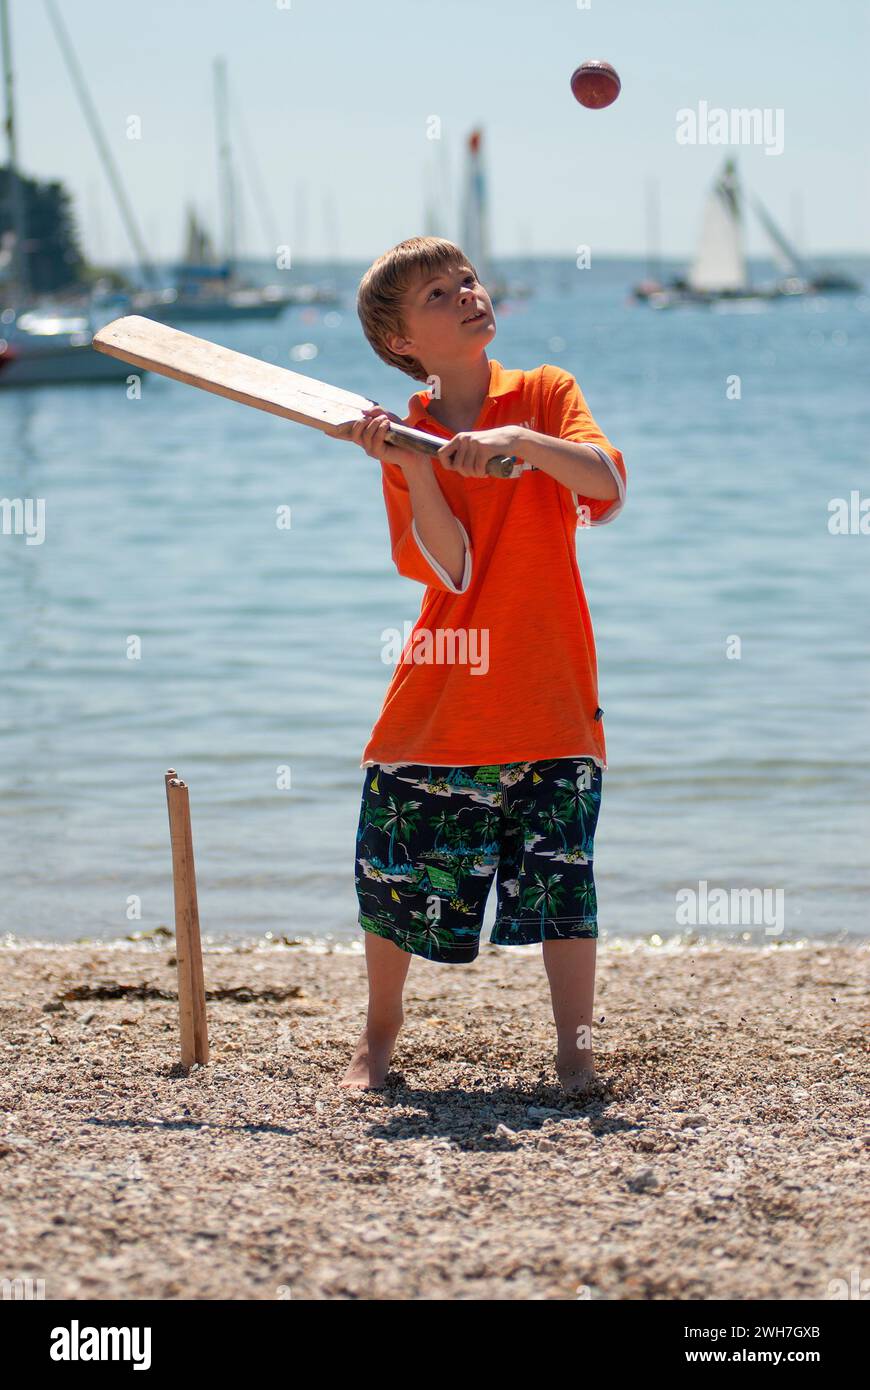 A young boy plays beach cricket during the summer holidays. He lines up the ball preparing to hit it for a run. Stock Photo